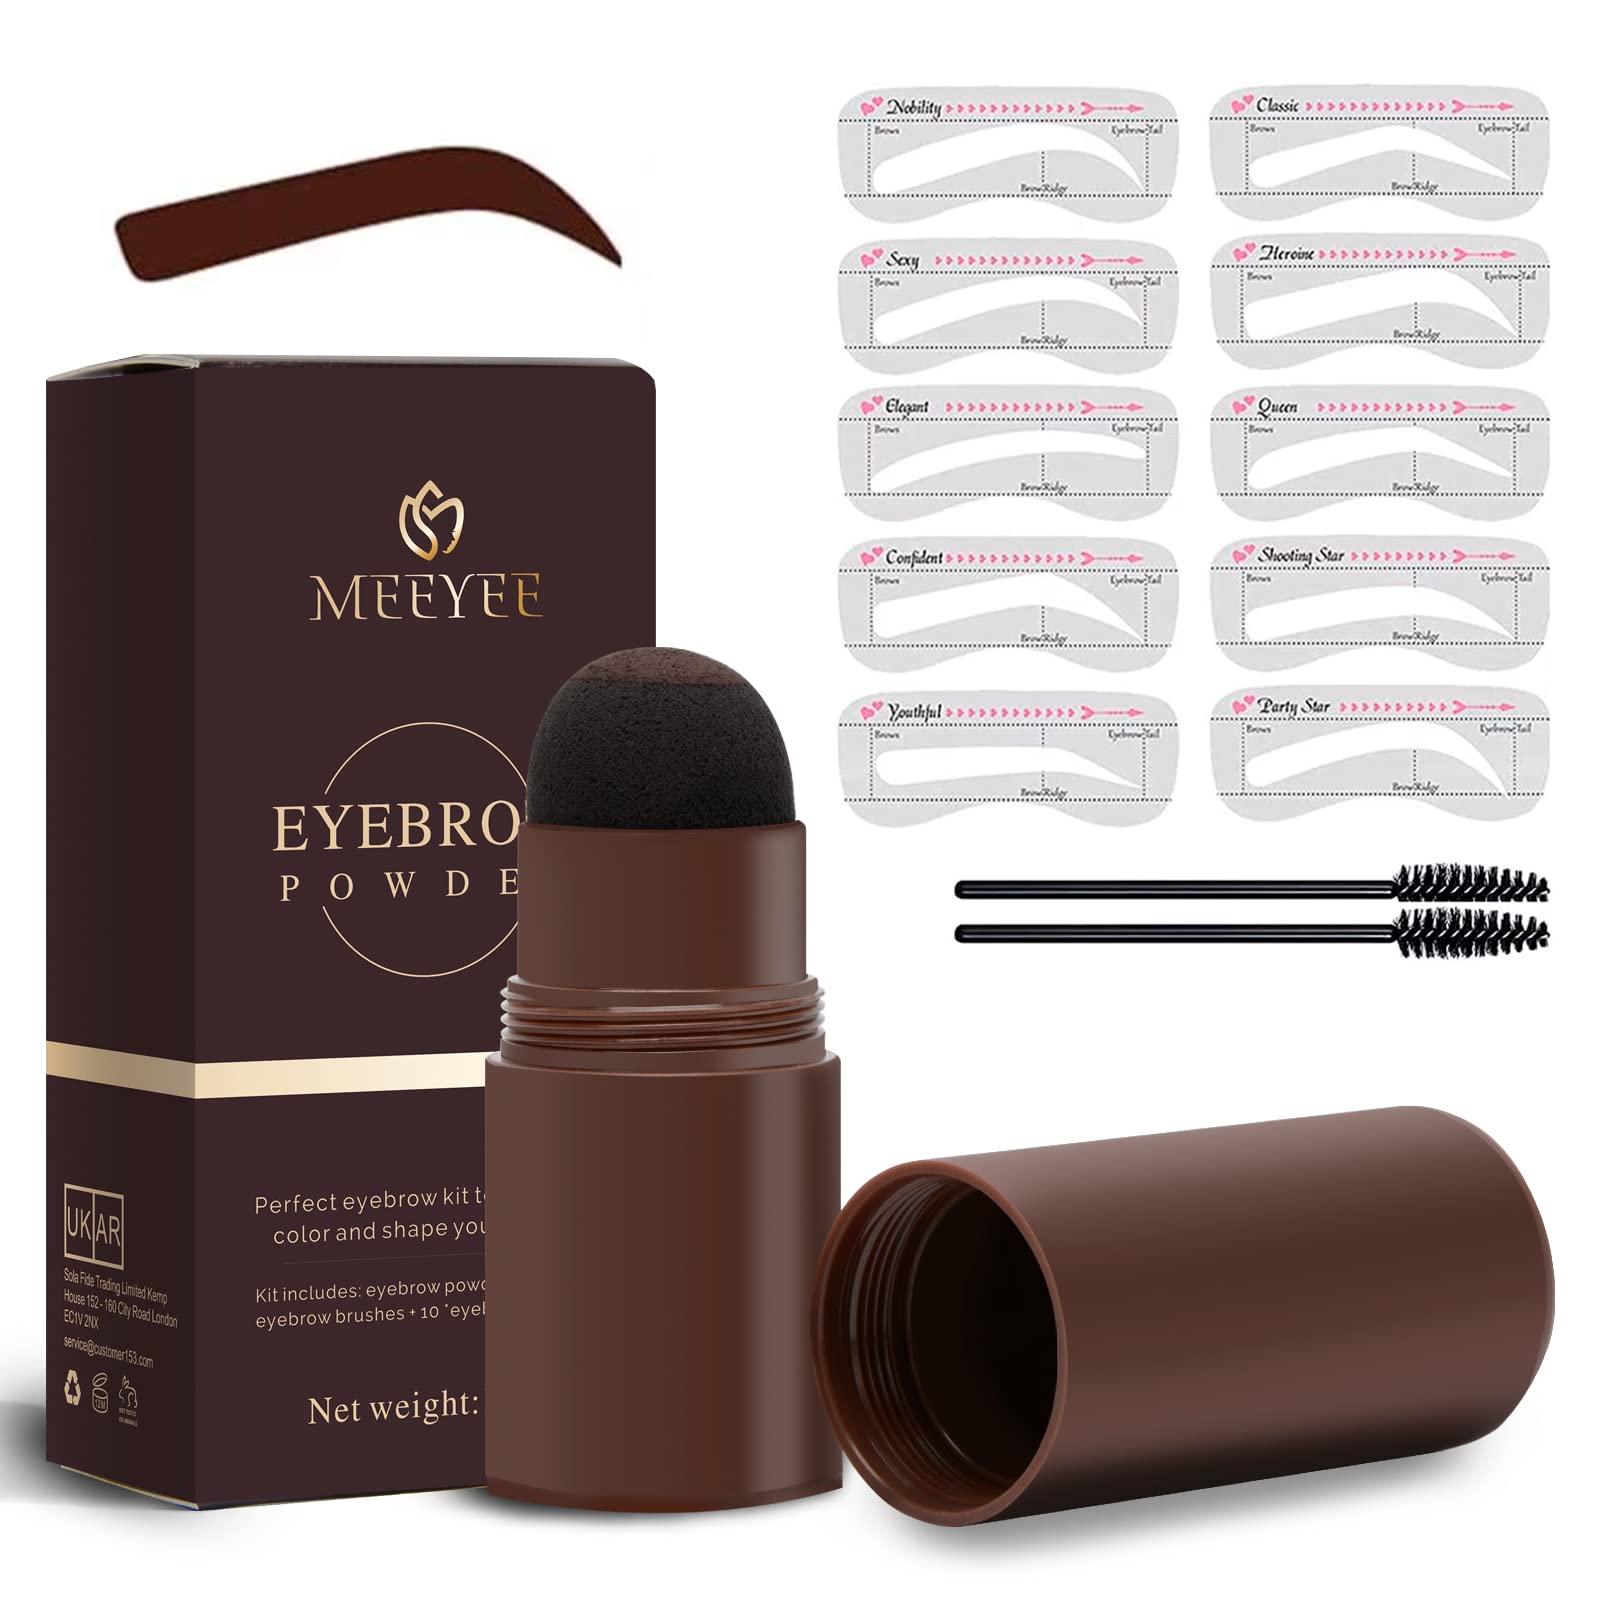 Eyebrow Stamp Shaping Kit, One Step Brow Eyebrow Stamp Stencil Kit Waterproof With 10 Reusable Eyebrow Templates 2 Eyebrow Pen Brushes Eyebrow Stamp Makeup Tools (Dark Brown)